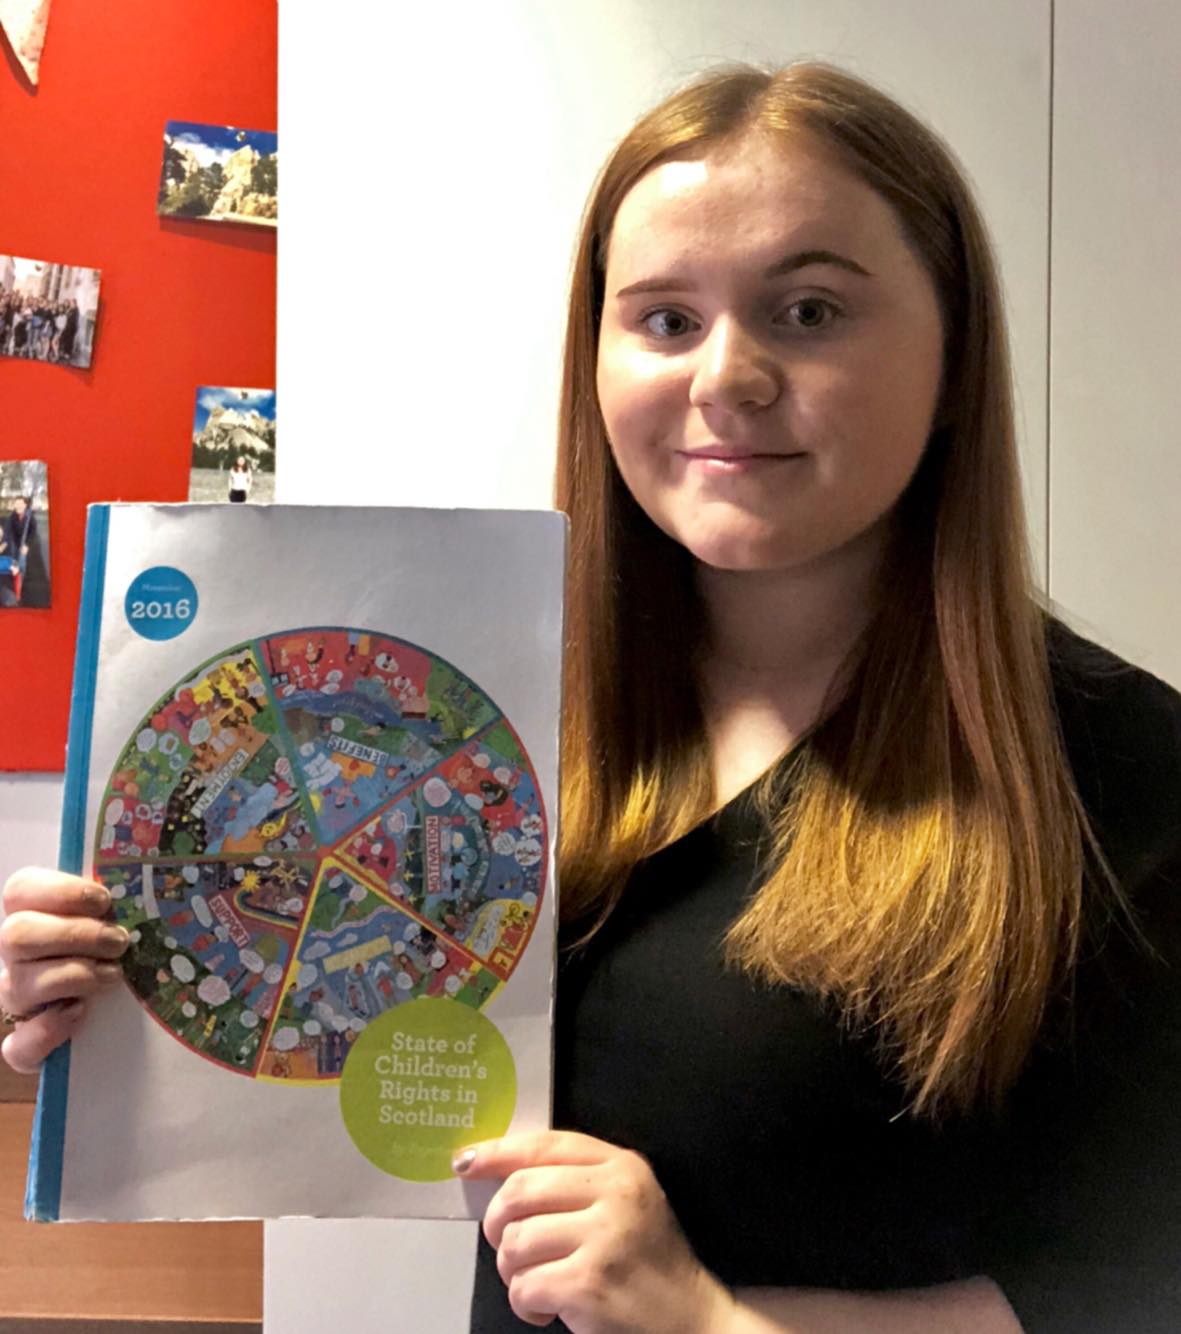 Katie with a copy of the 2016 State of Children’s Rights Report